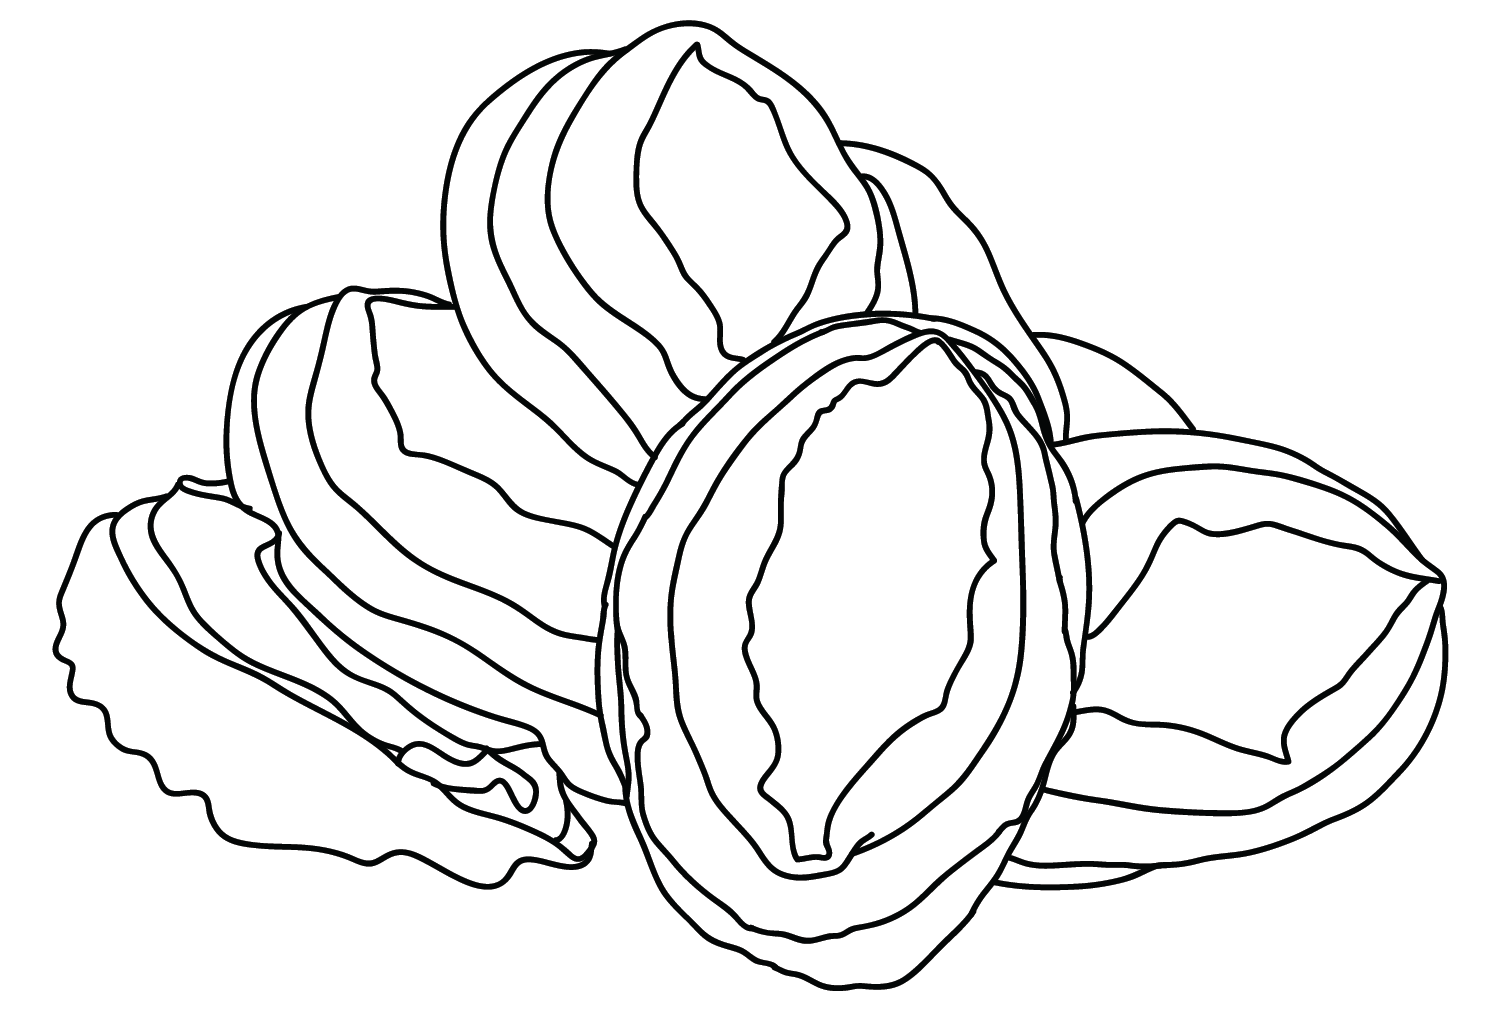 Abalone Images to Color from Abalone